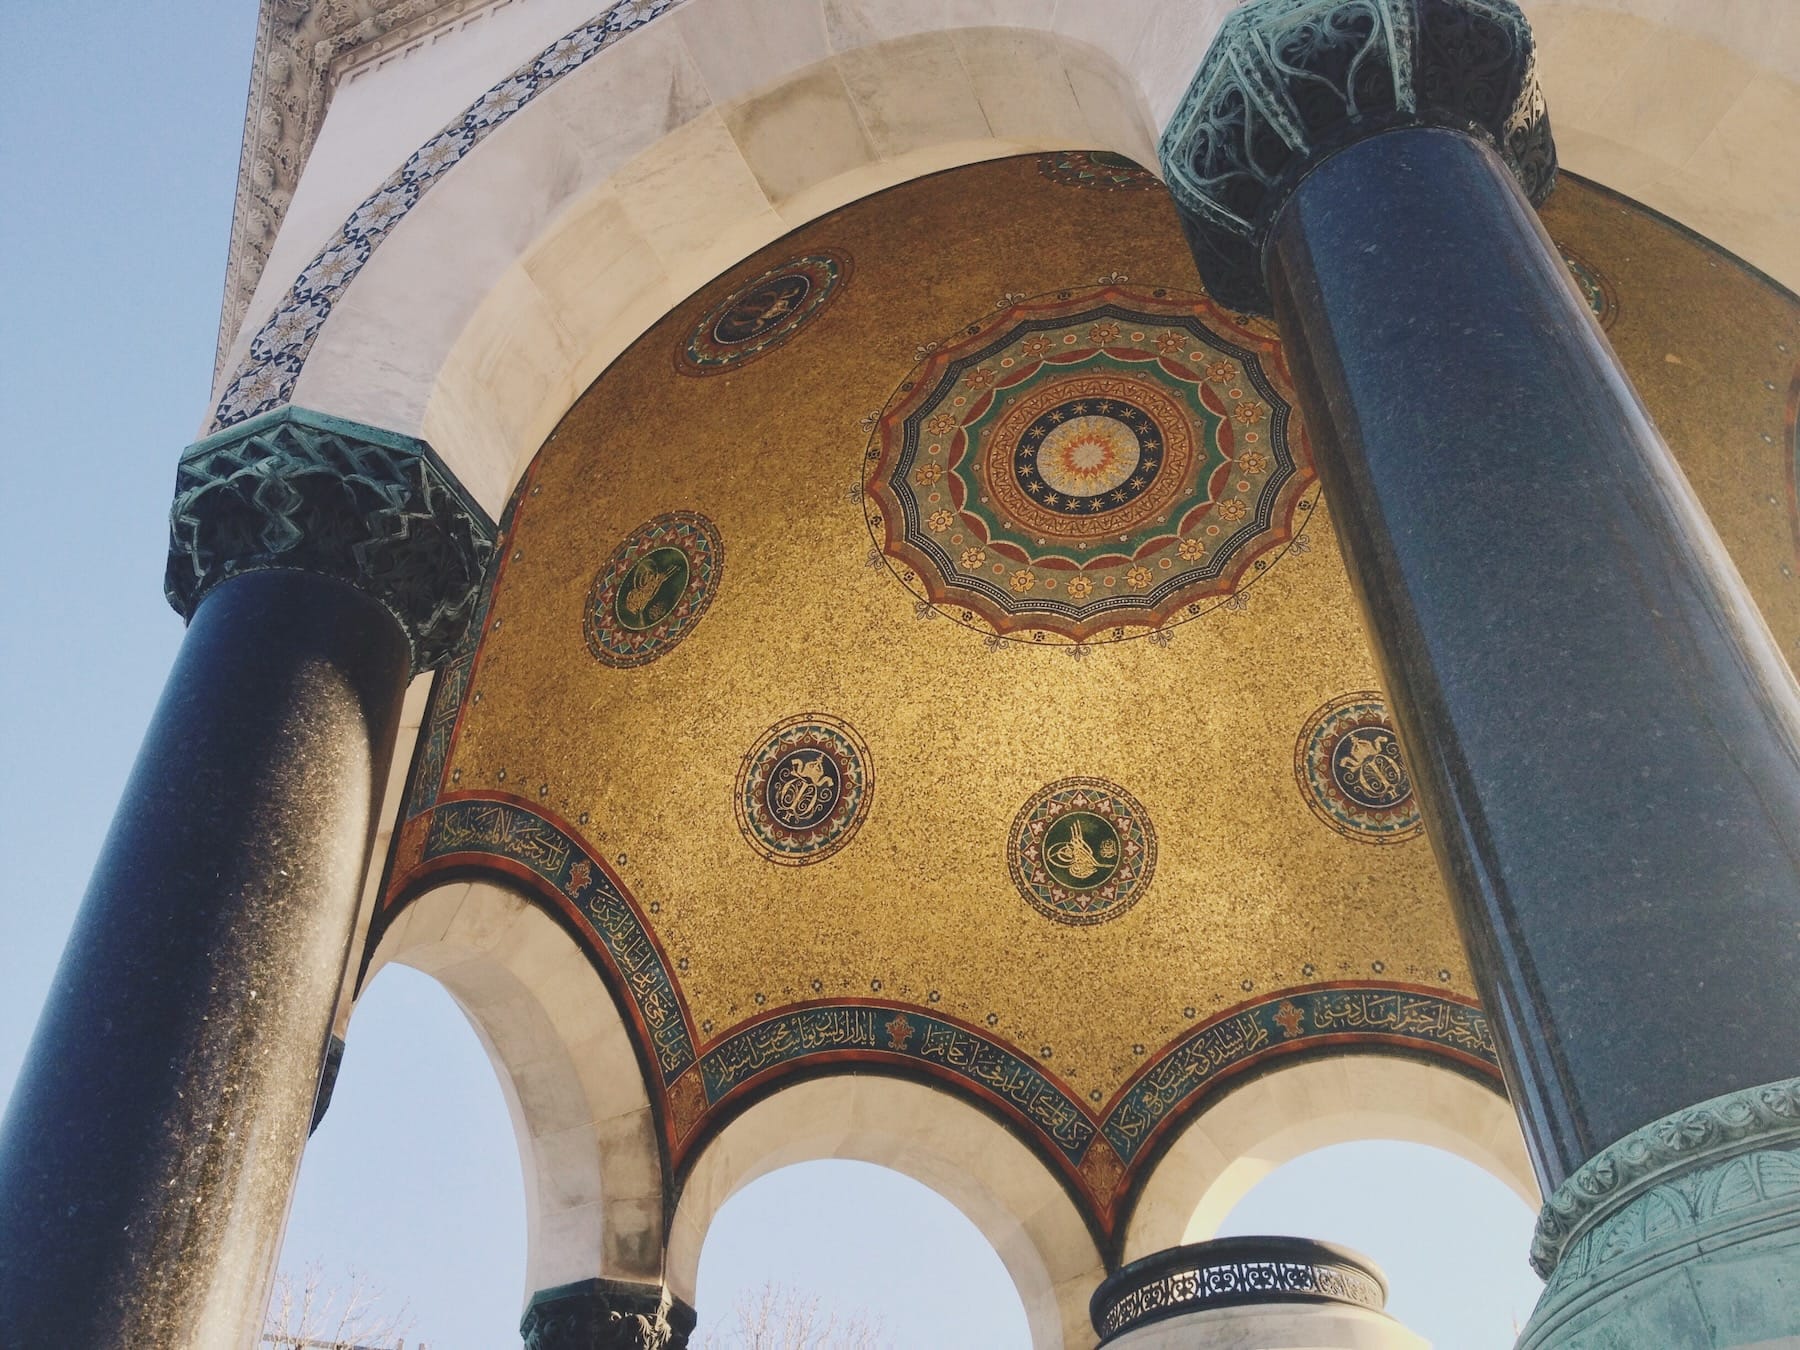 Fine Islamic ornament under a domed outdoor structure in Istanbul. Golds and colors glowing in ethereal light.